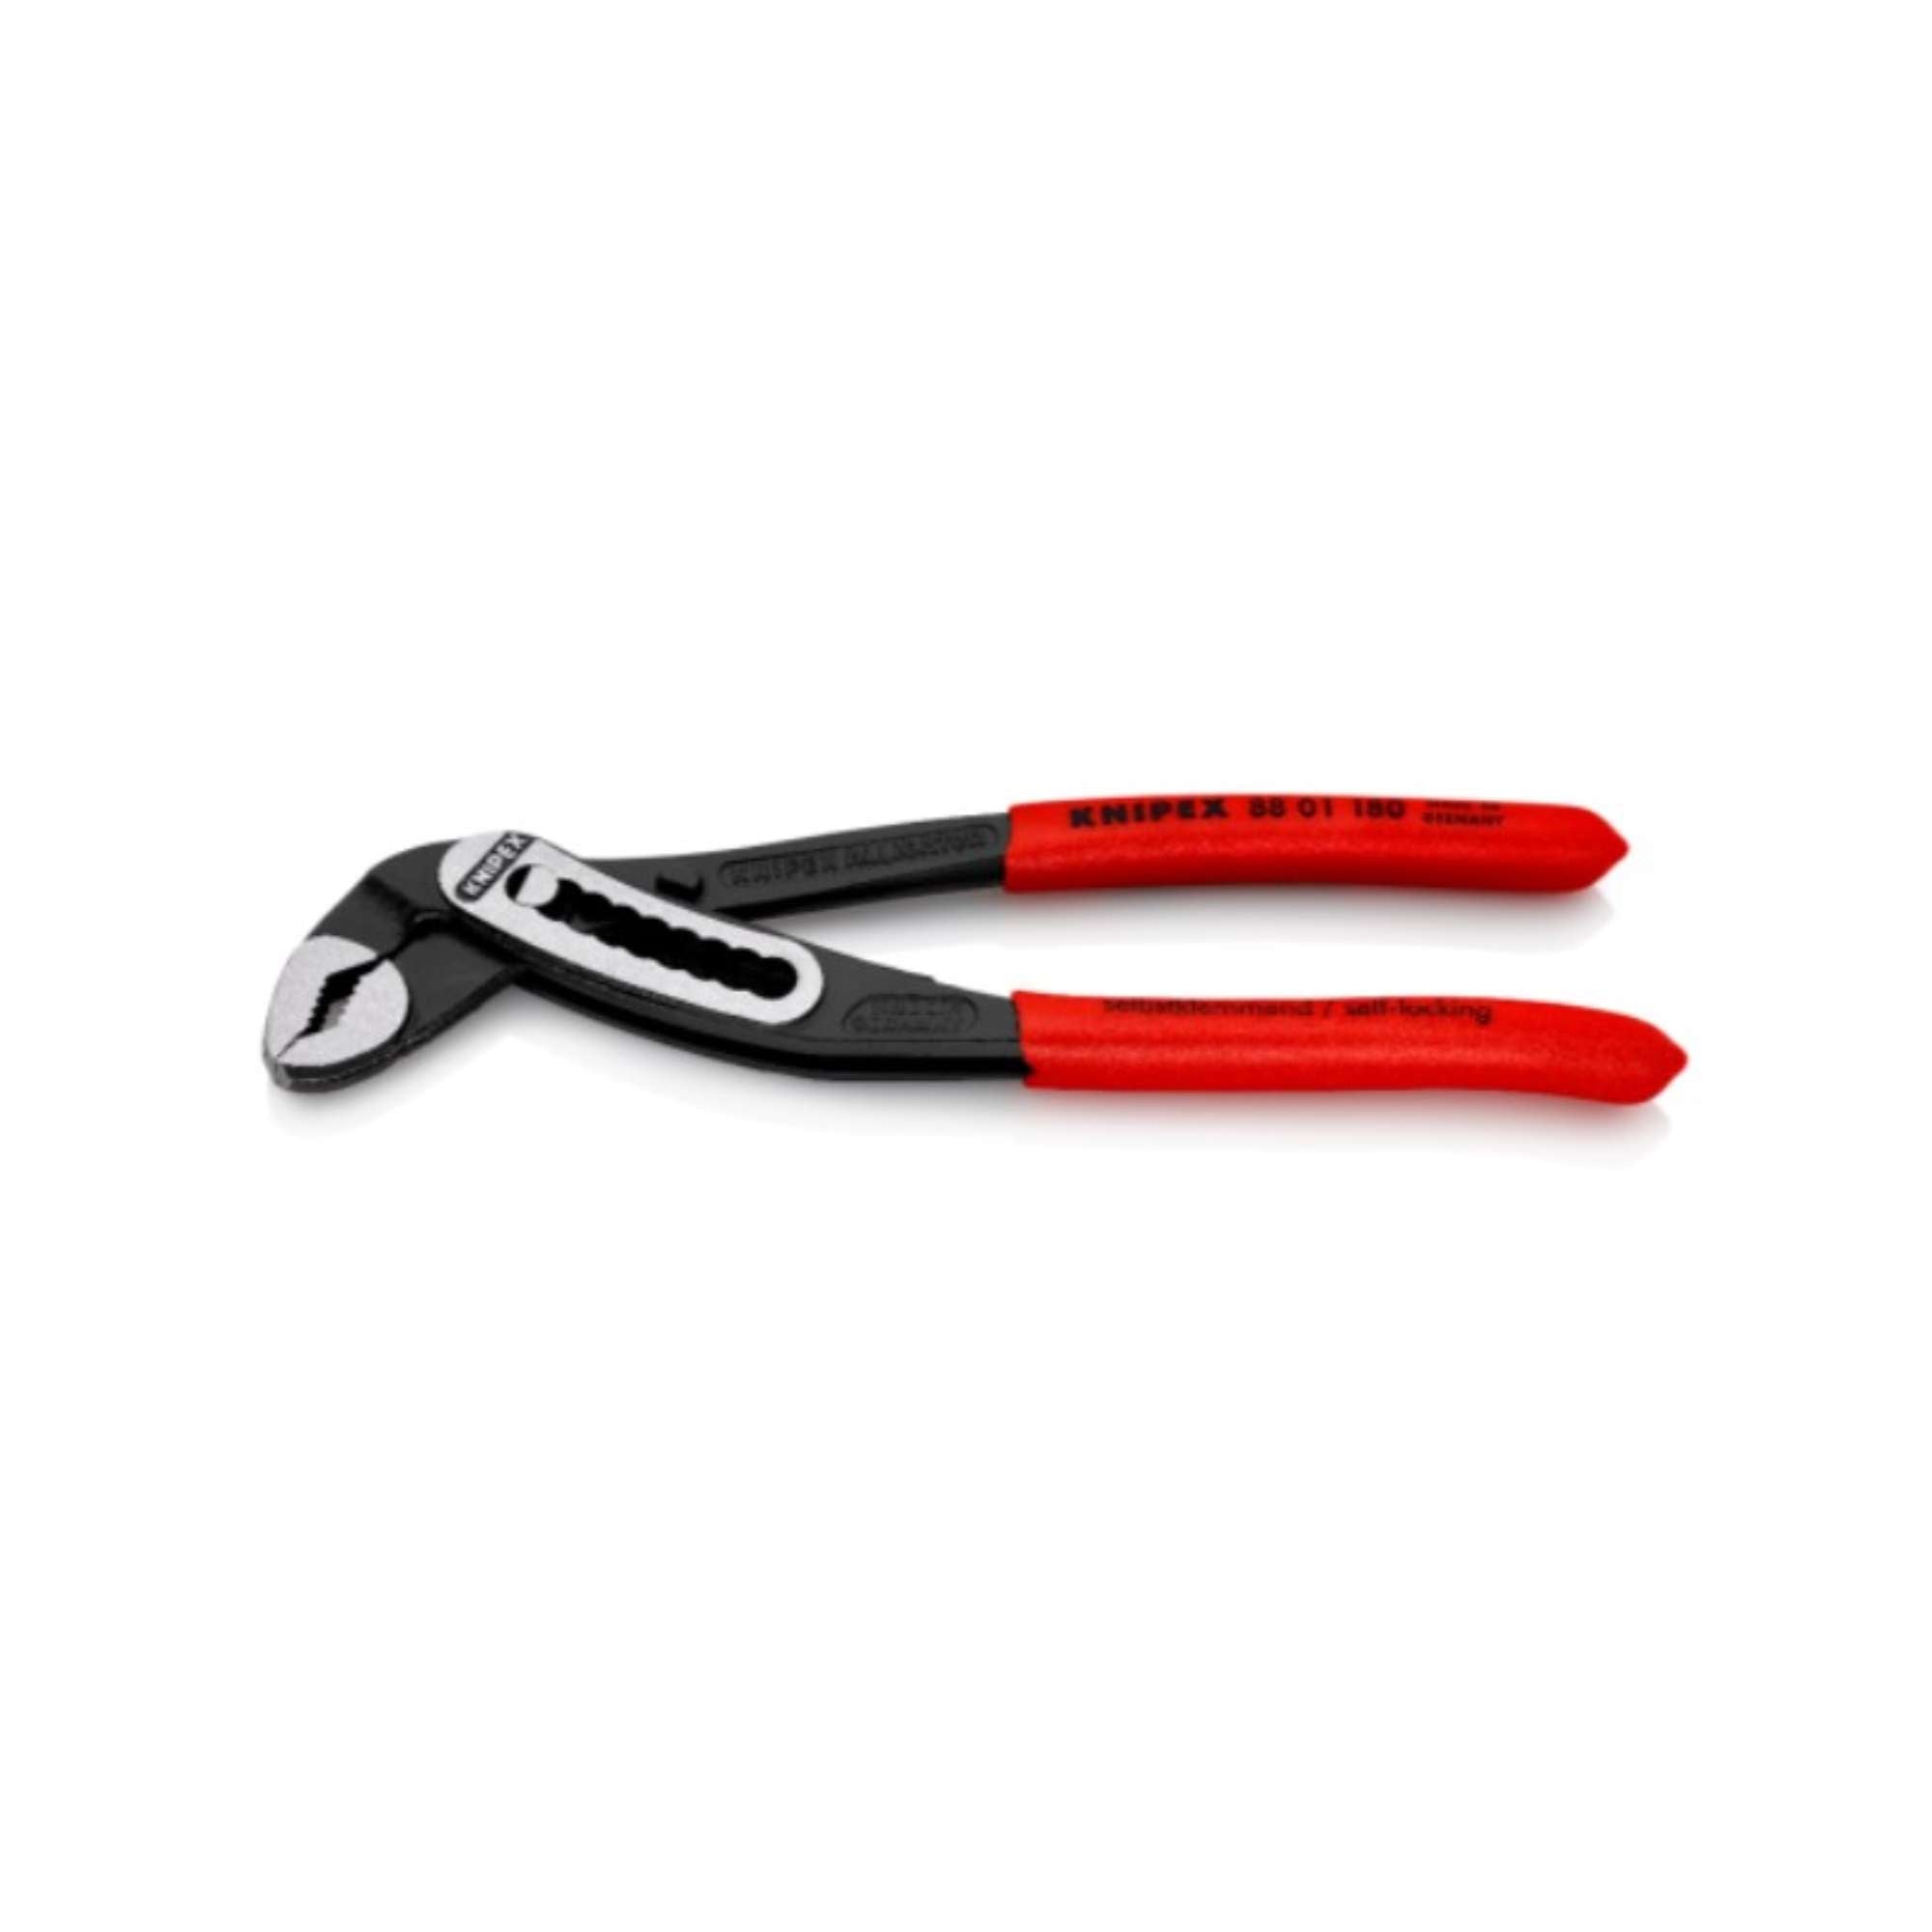 Adjustable Pipe and Nut Pliers - Knipex Alligator